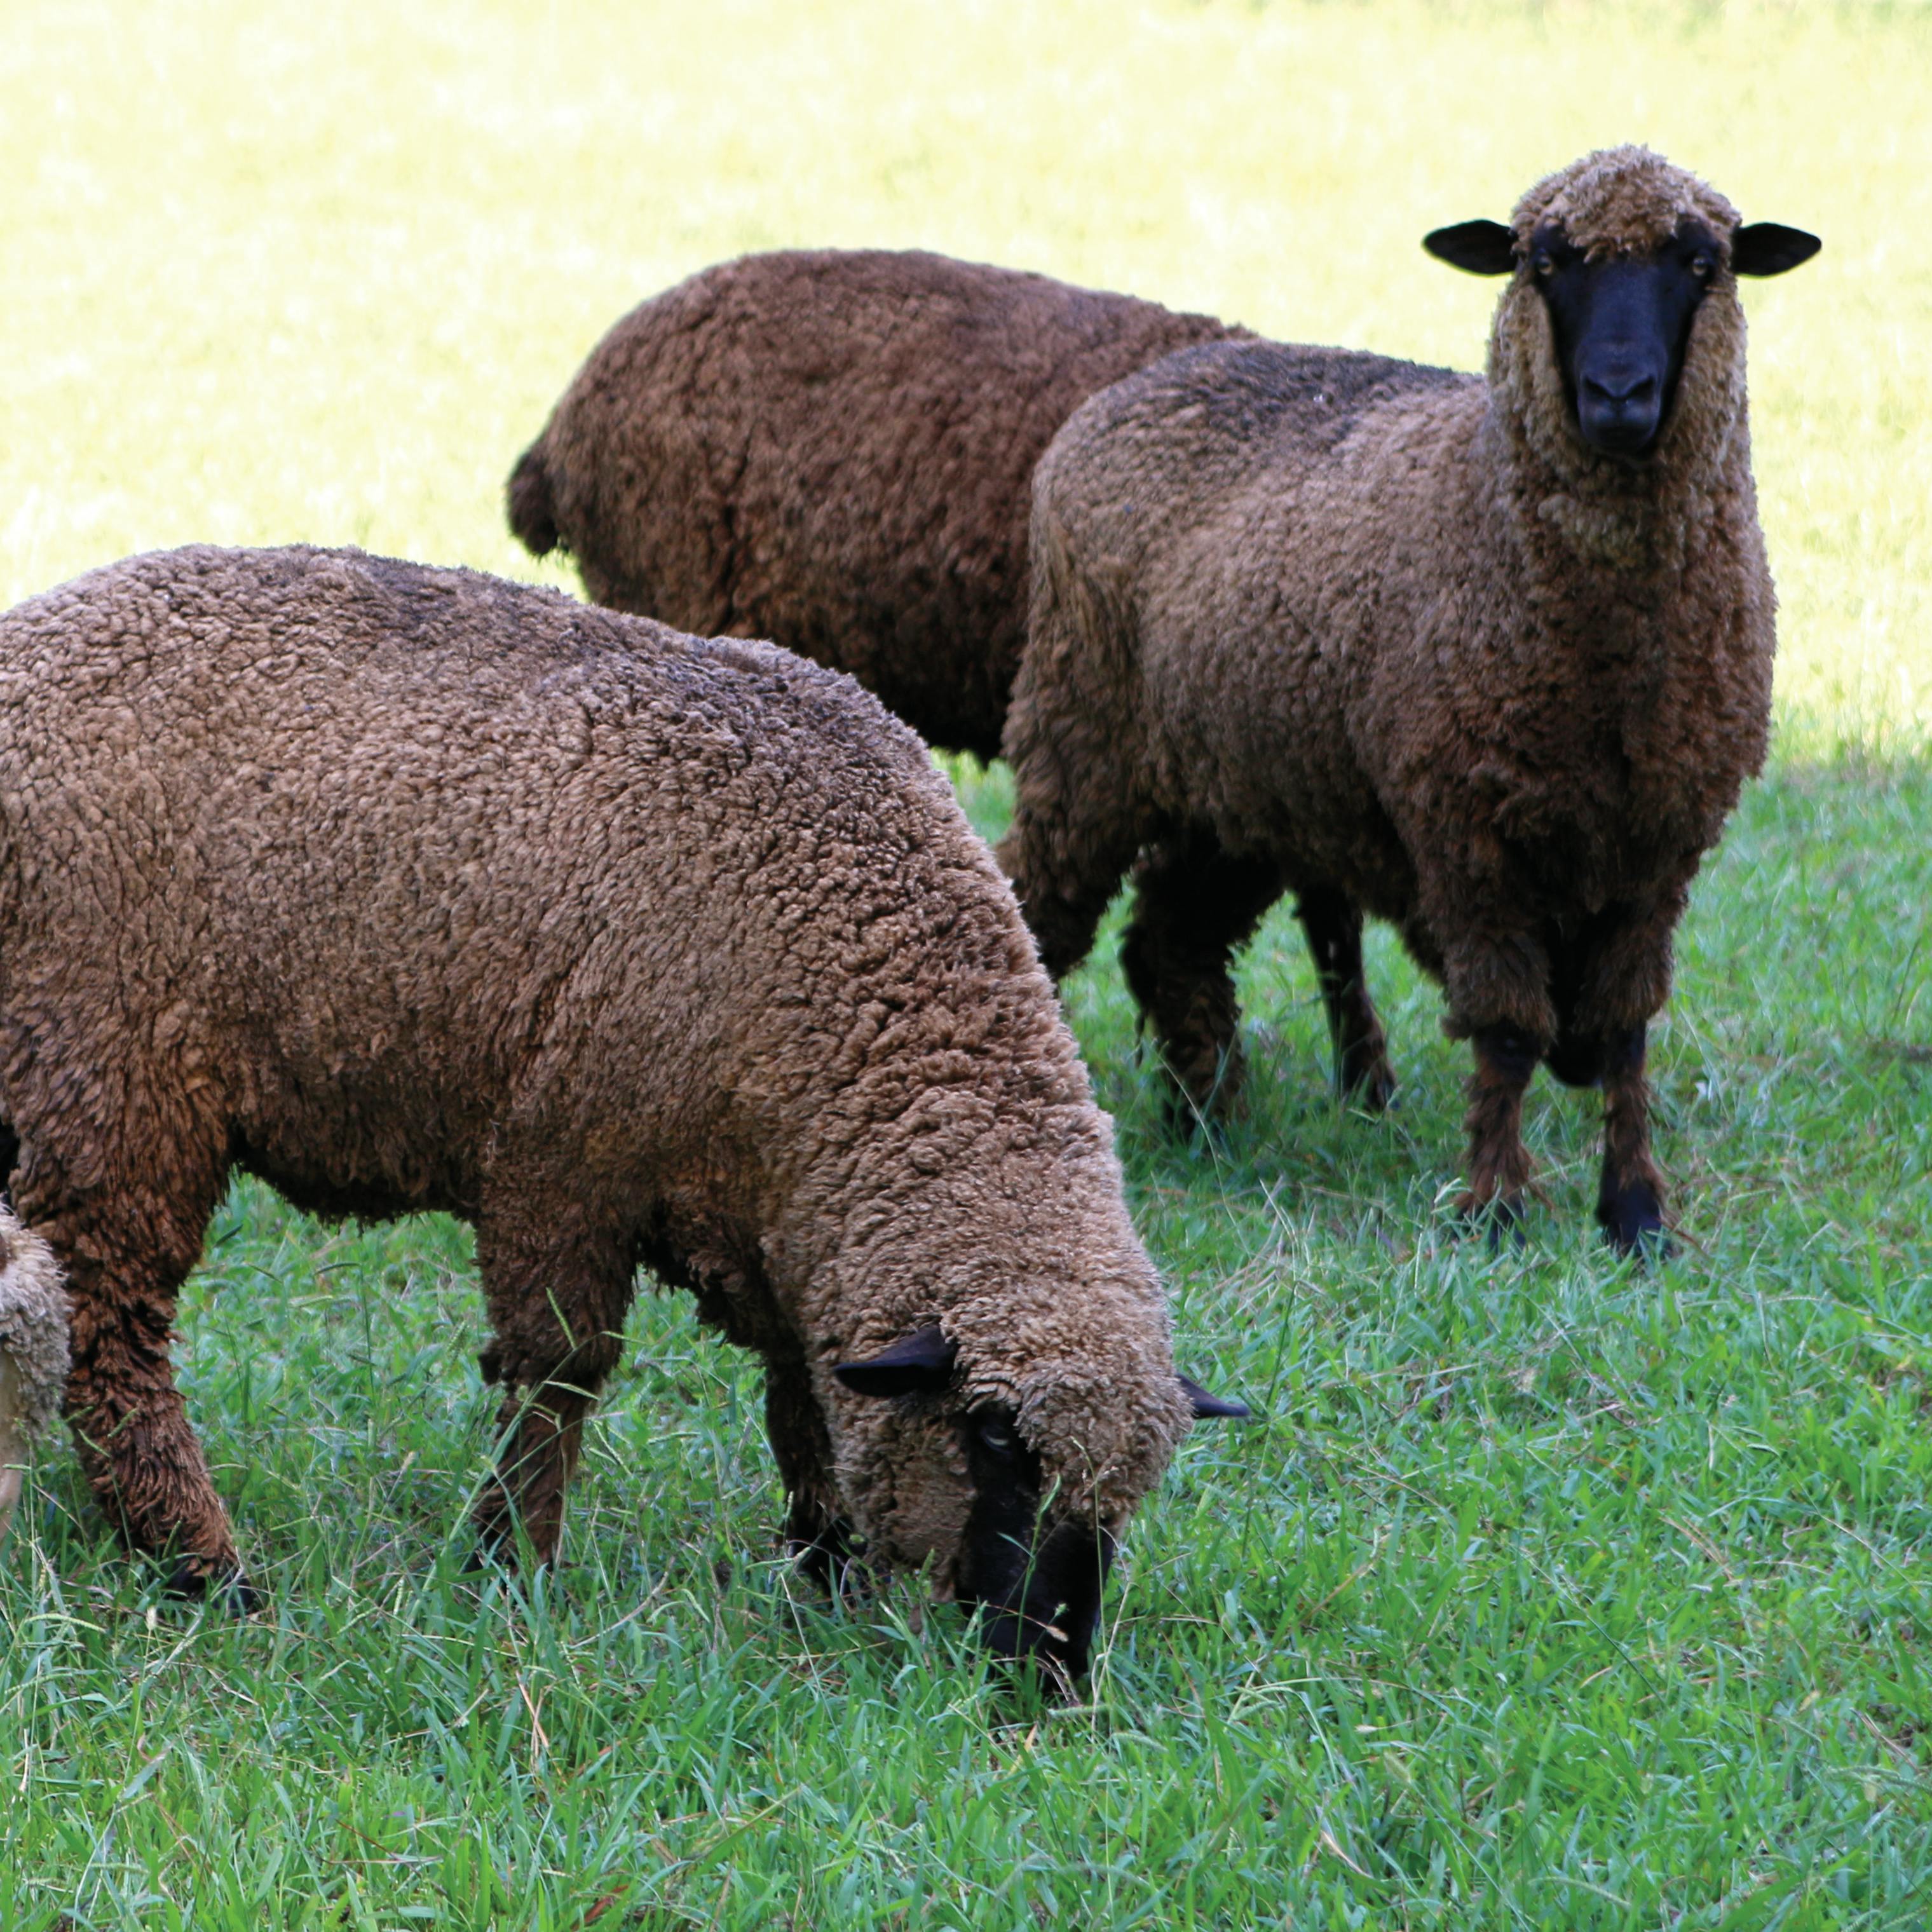 Several brown sheep grazing on lawn